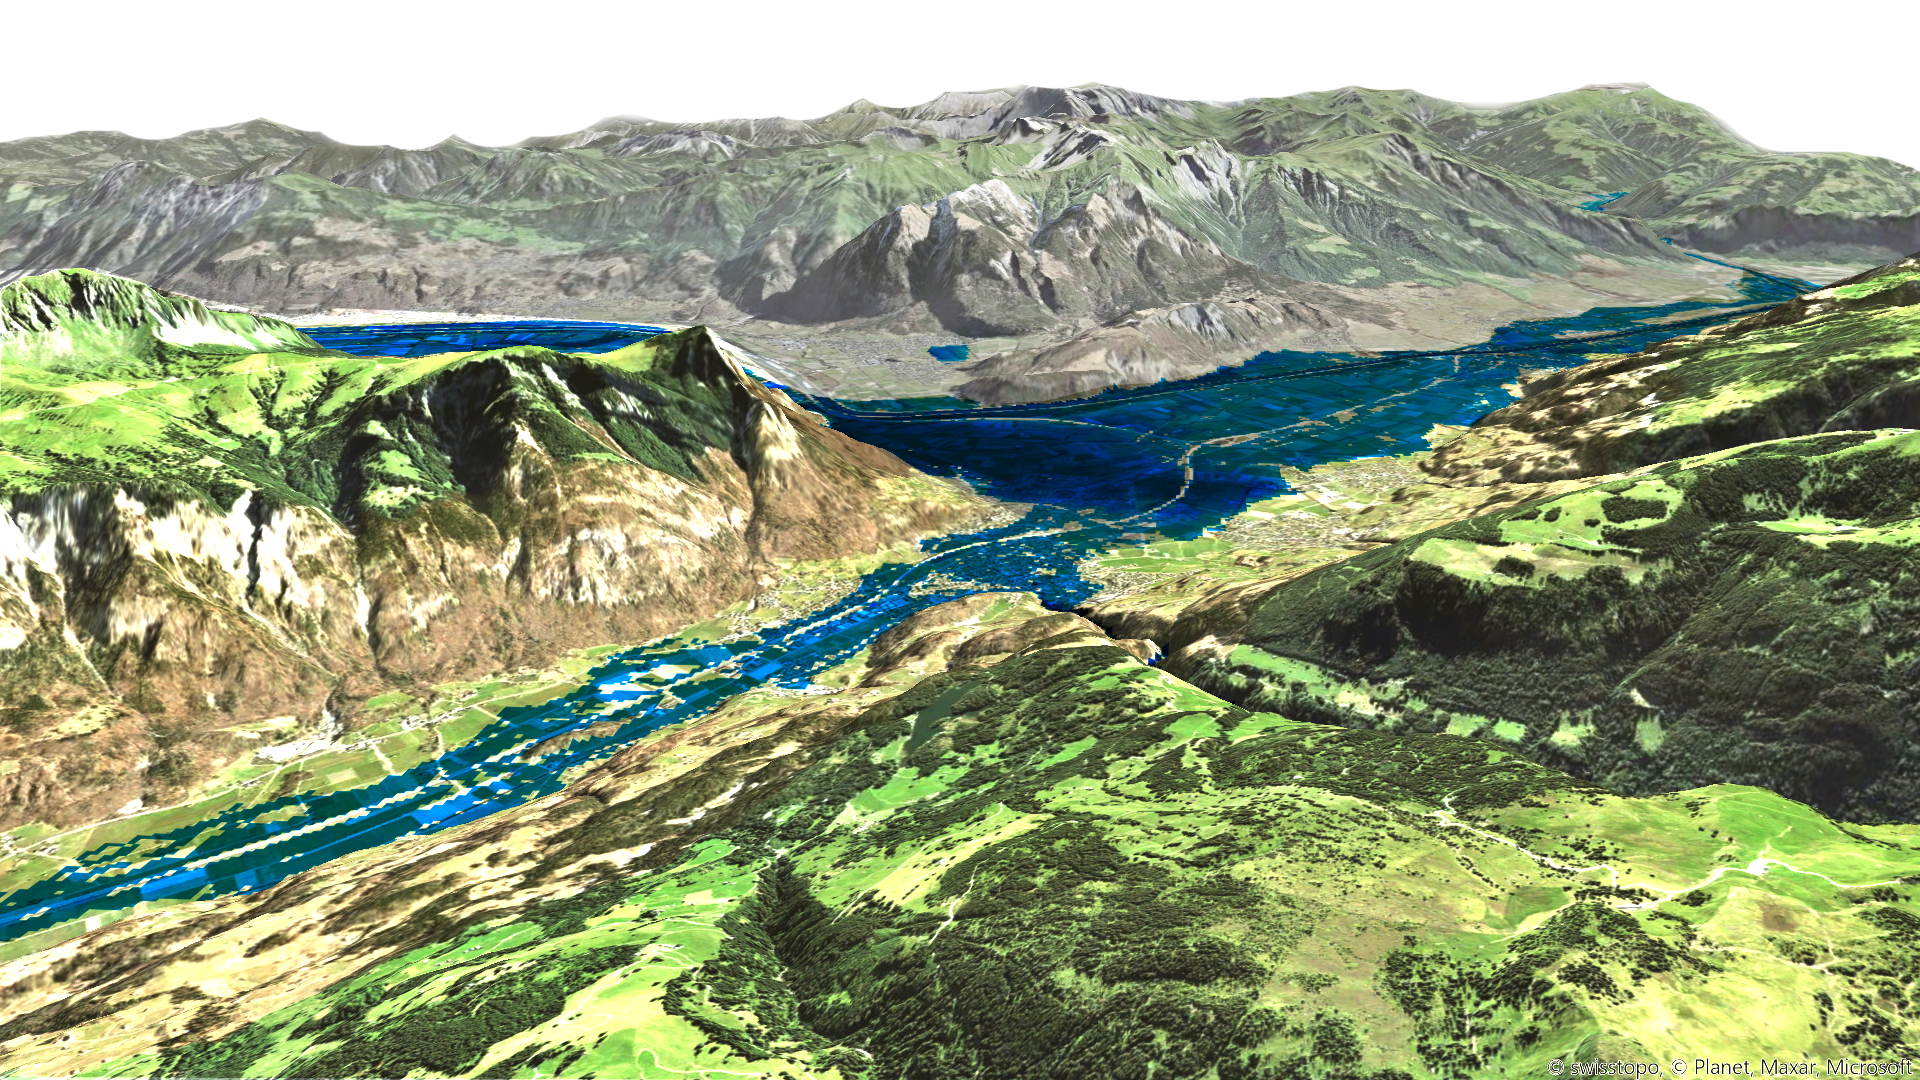 3D visualisation of flood risk in a mountainous region